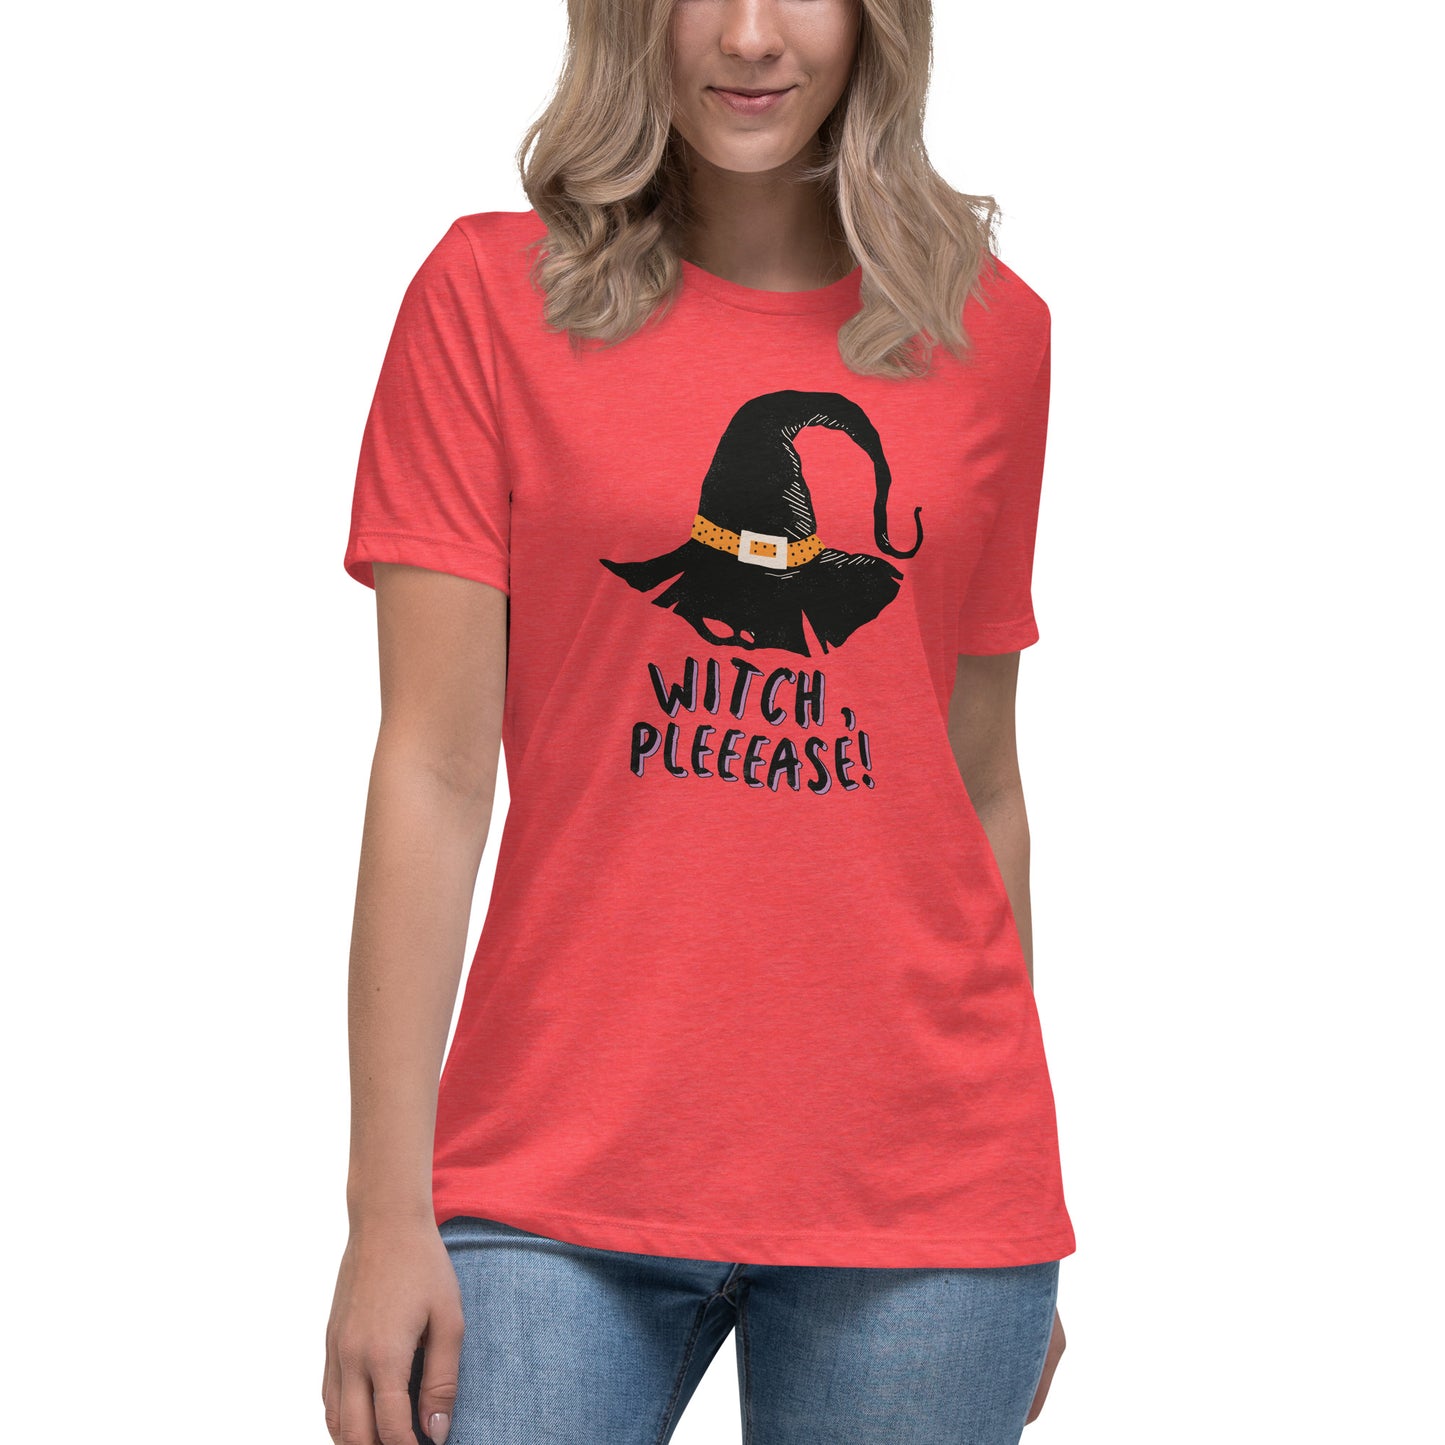 Witch Please! Women's Relaxed T-Shirt Tee Tshirt